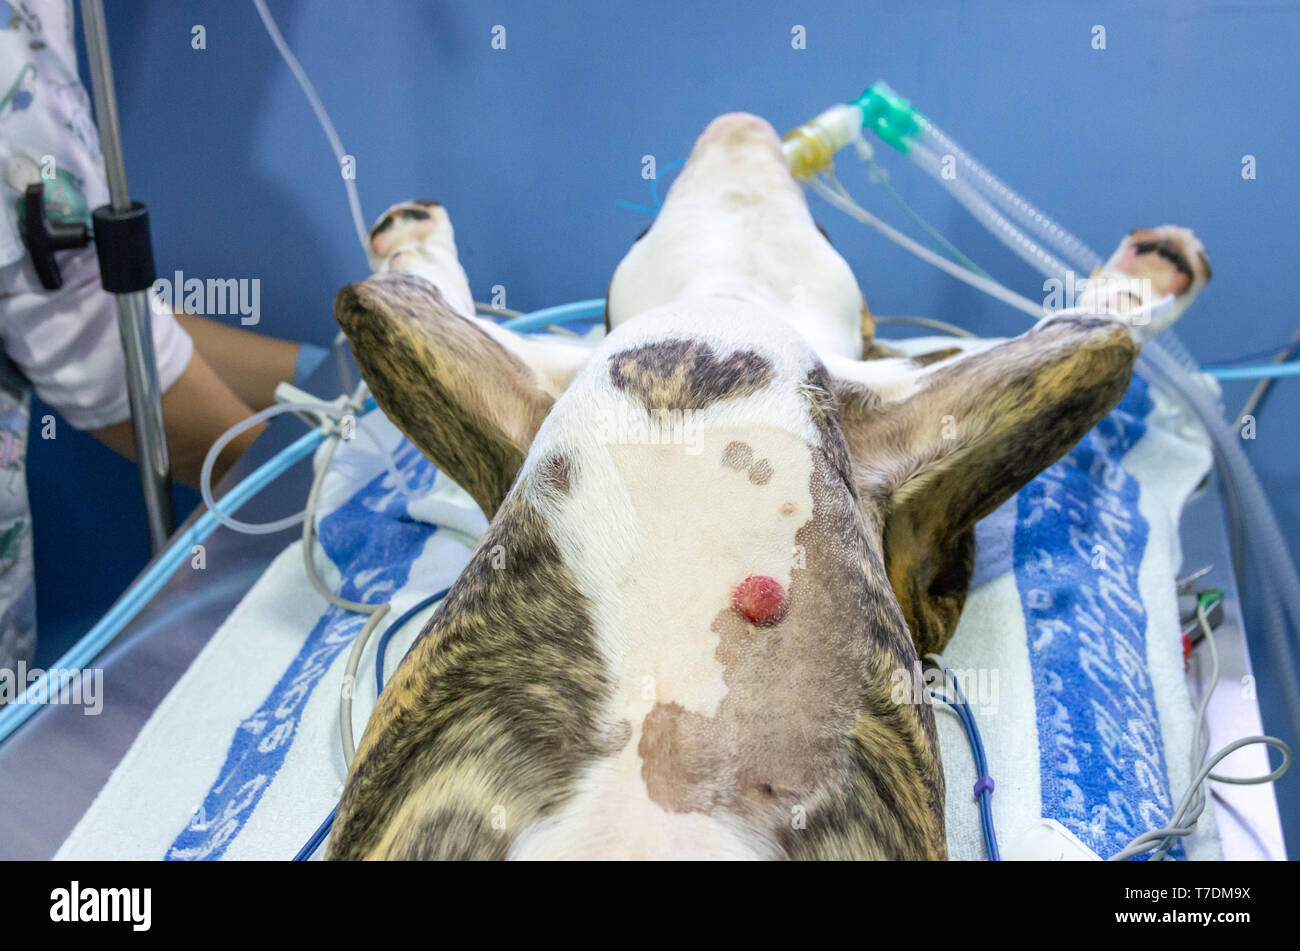 Positioning a dog on the operating table for a surgery Stock Photo